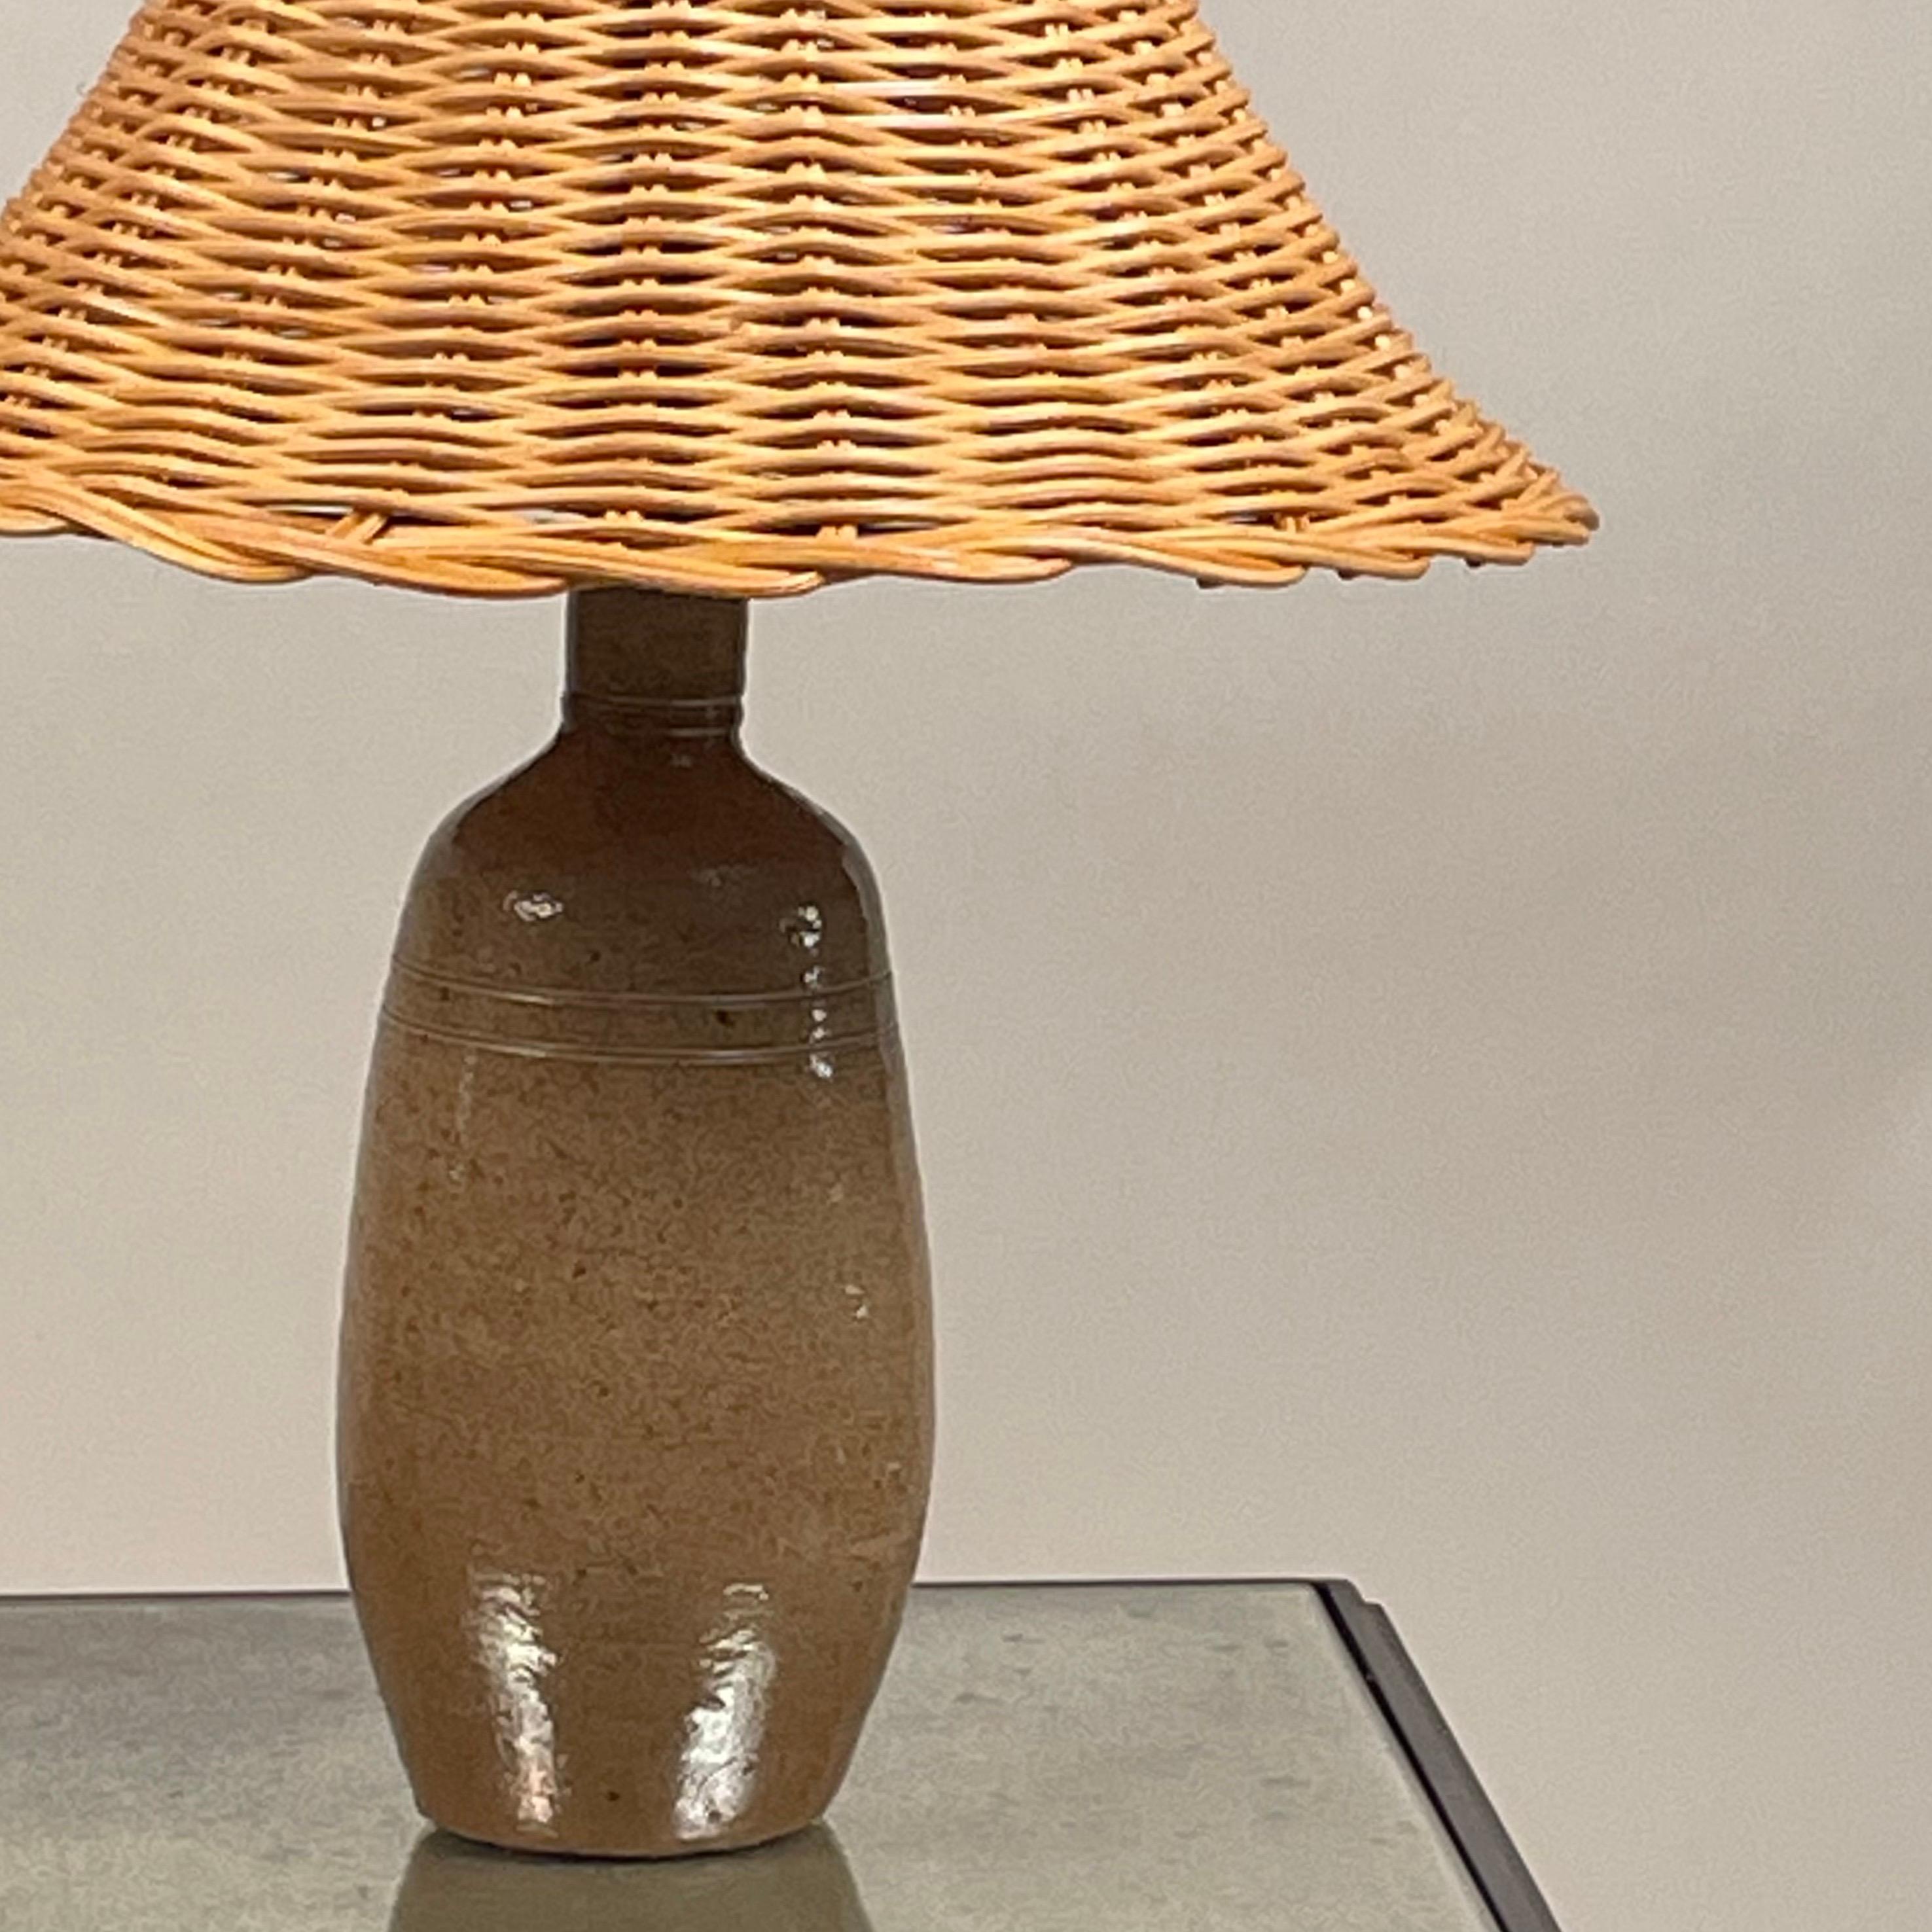 rattan table lamps